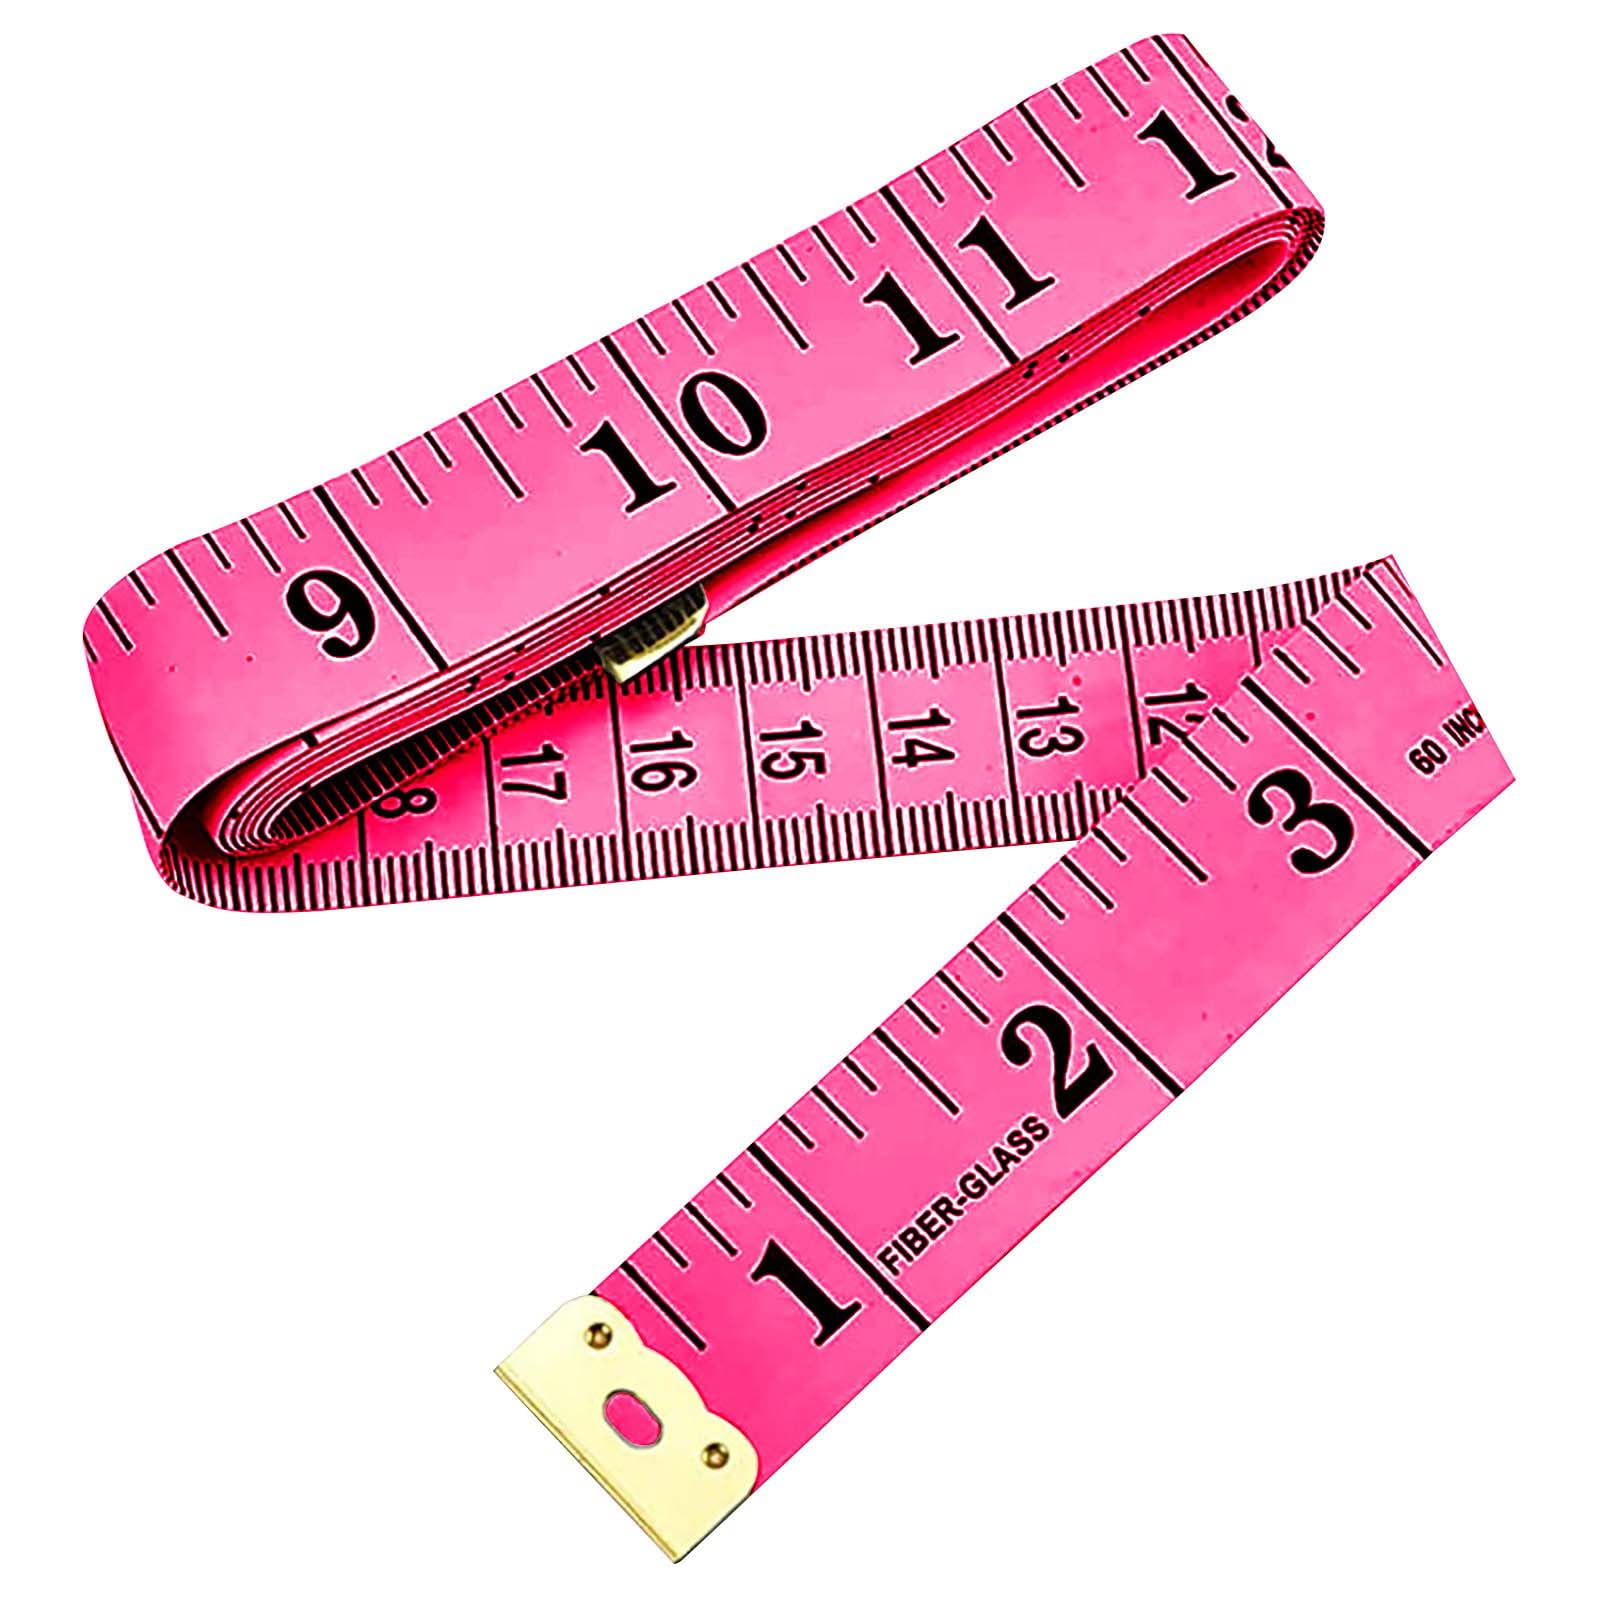 60" Retractable Sewing Tailor Ruler Tape Dieting Tapeline Soft Body Craft Tool 